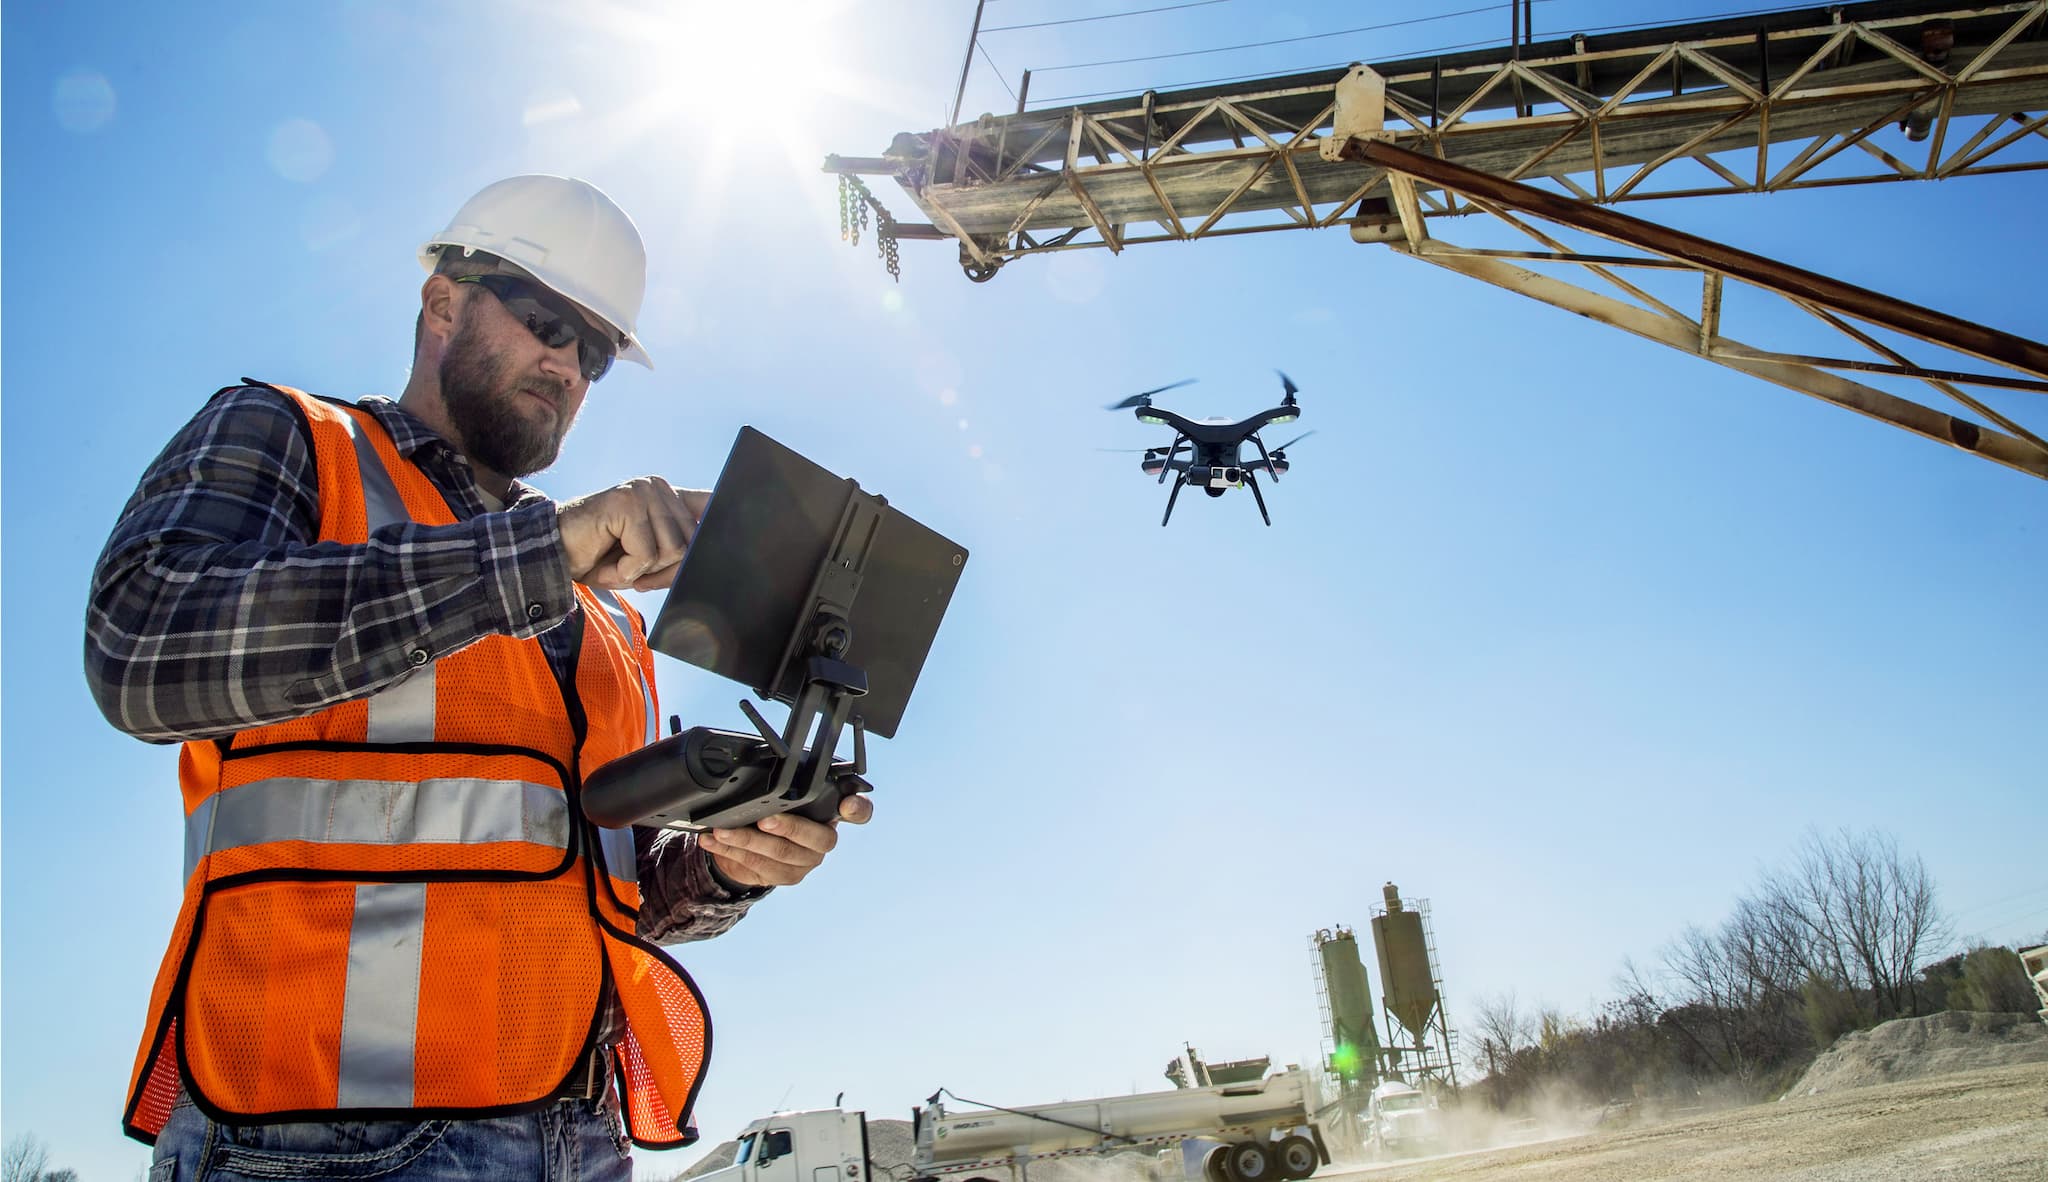  Drone on Site with Worker